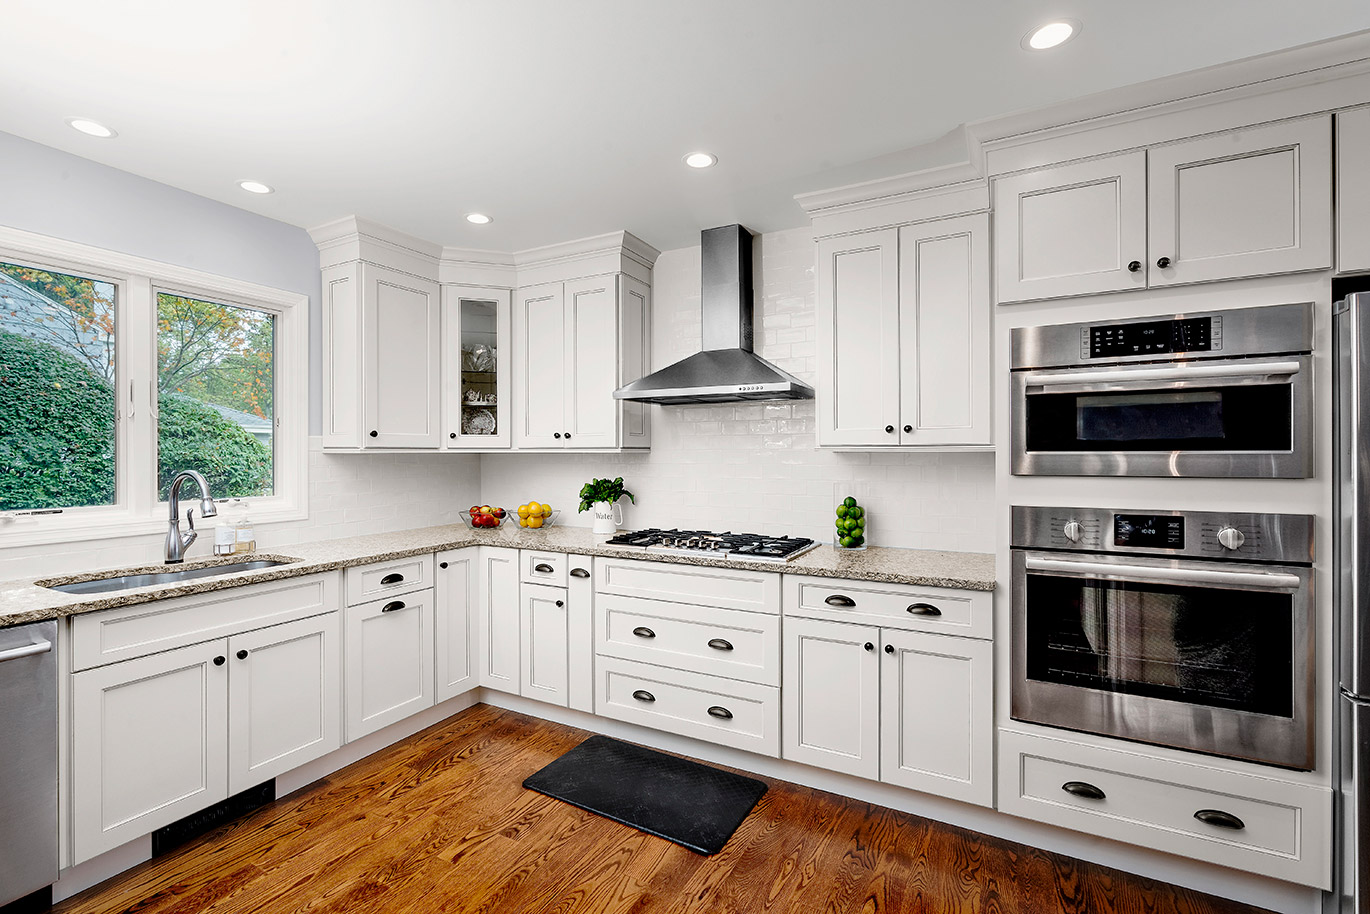 wholesale kitchen cabinets near me | in stock today cabinets